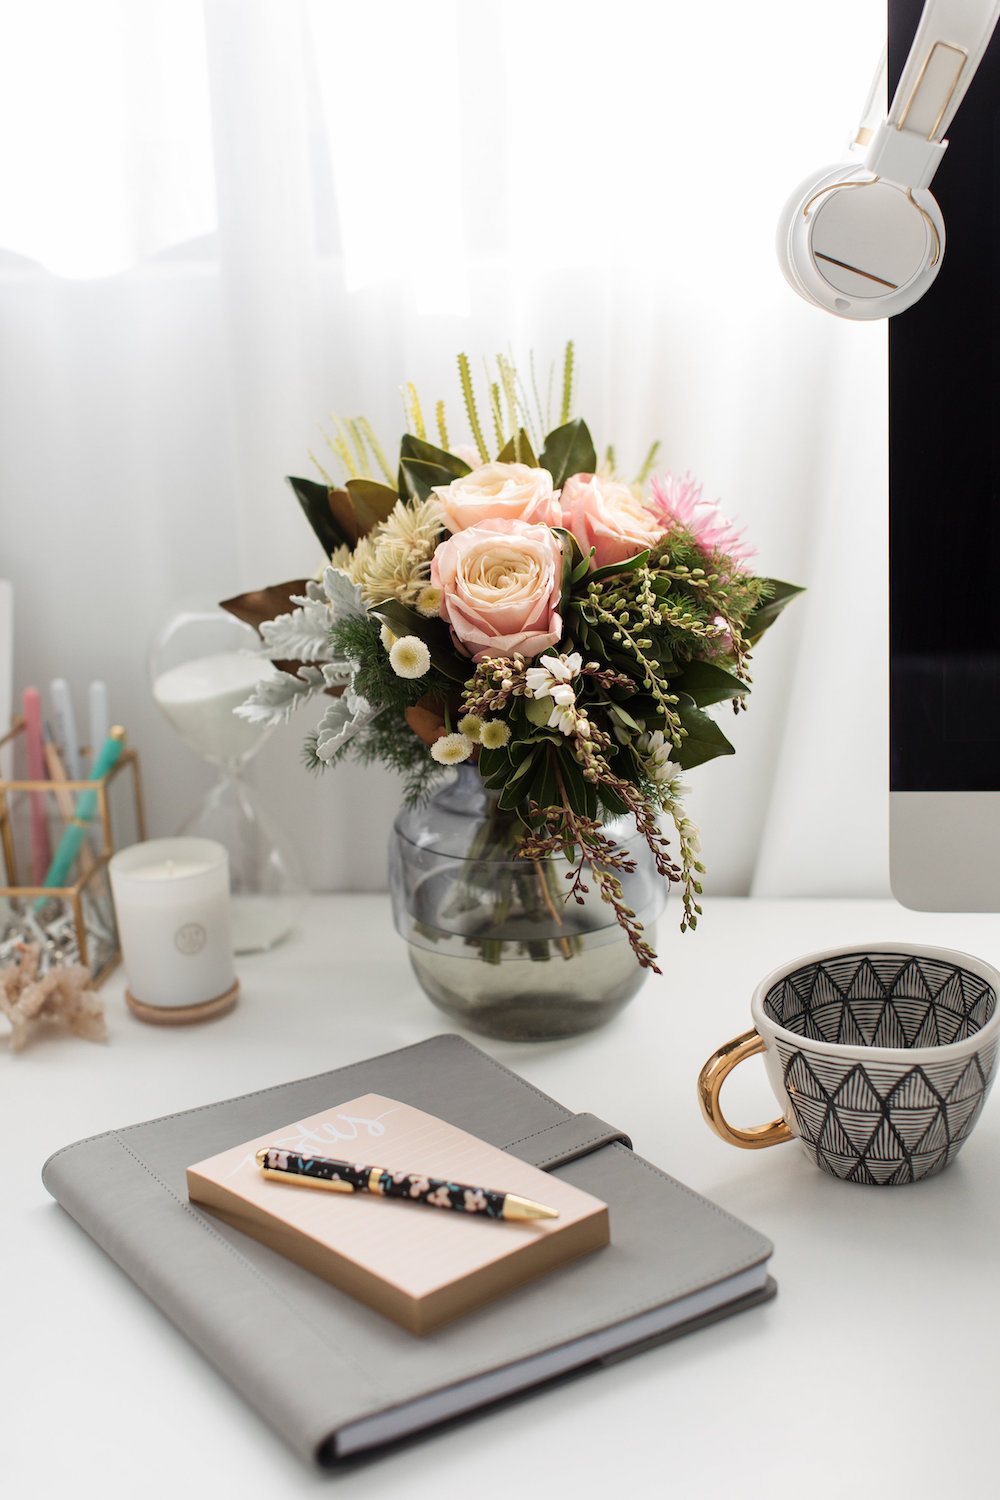 Fresh flowers easy ideas to create a stylish home office